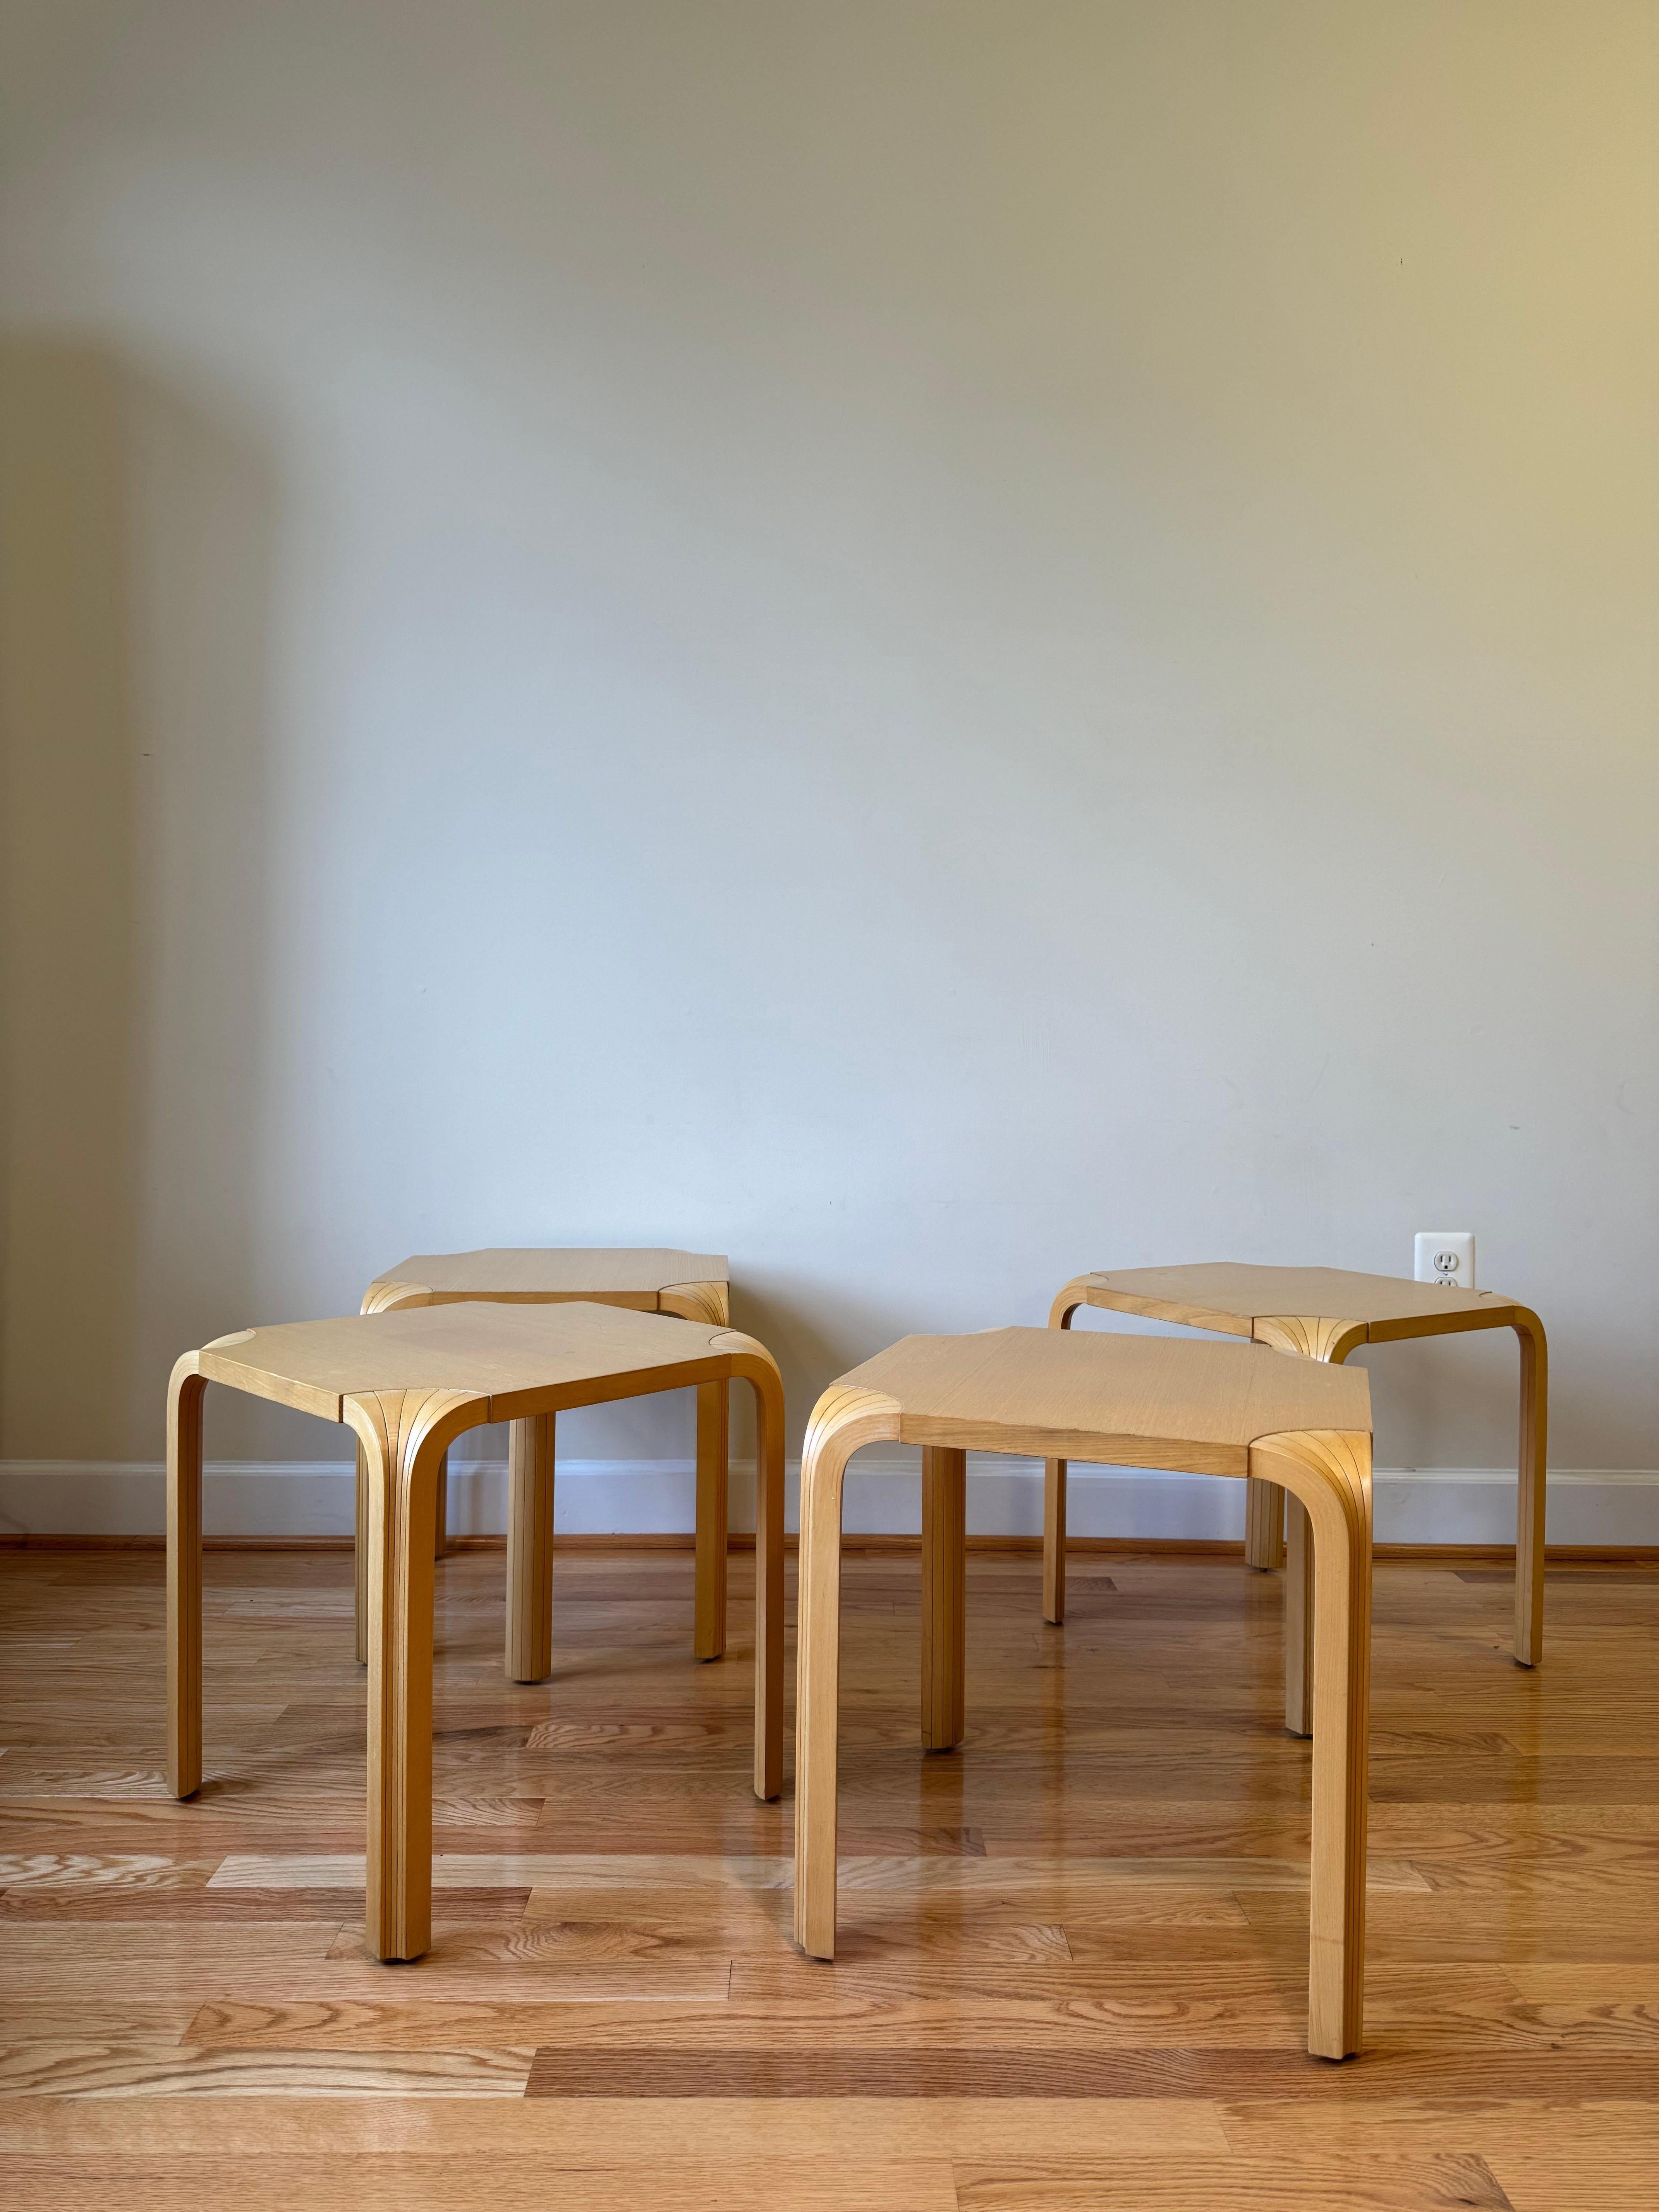 This stool was designed by Alvar Aalto in 1954 and features his impressive X-Leg design. 
X-Legs are created from splitting the traditional L-Leg in a longitudinal direction and re-connecting the pieces to create an intricate fan-like design. 
Aalto